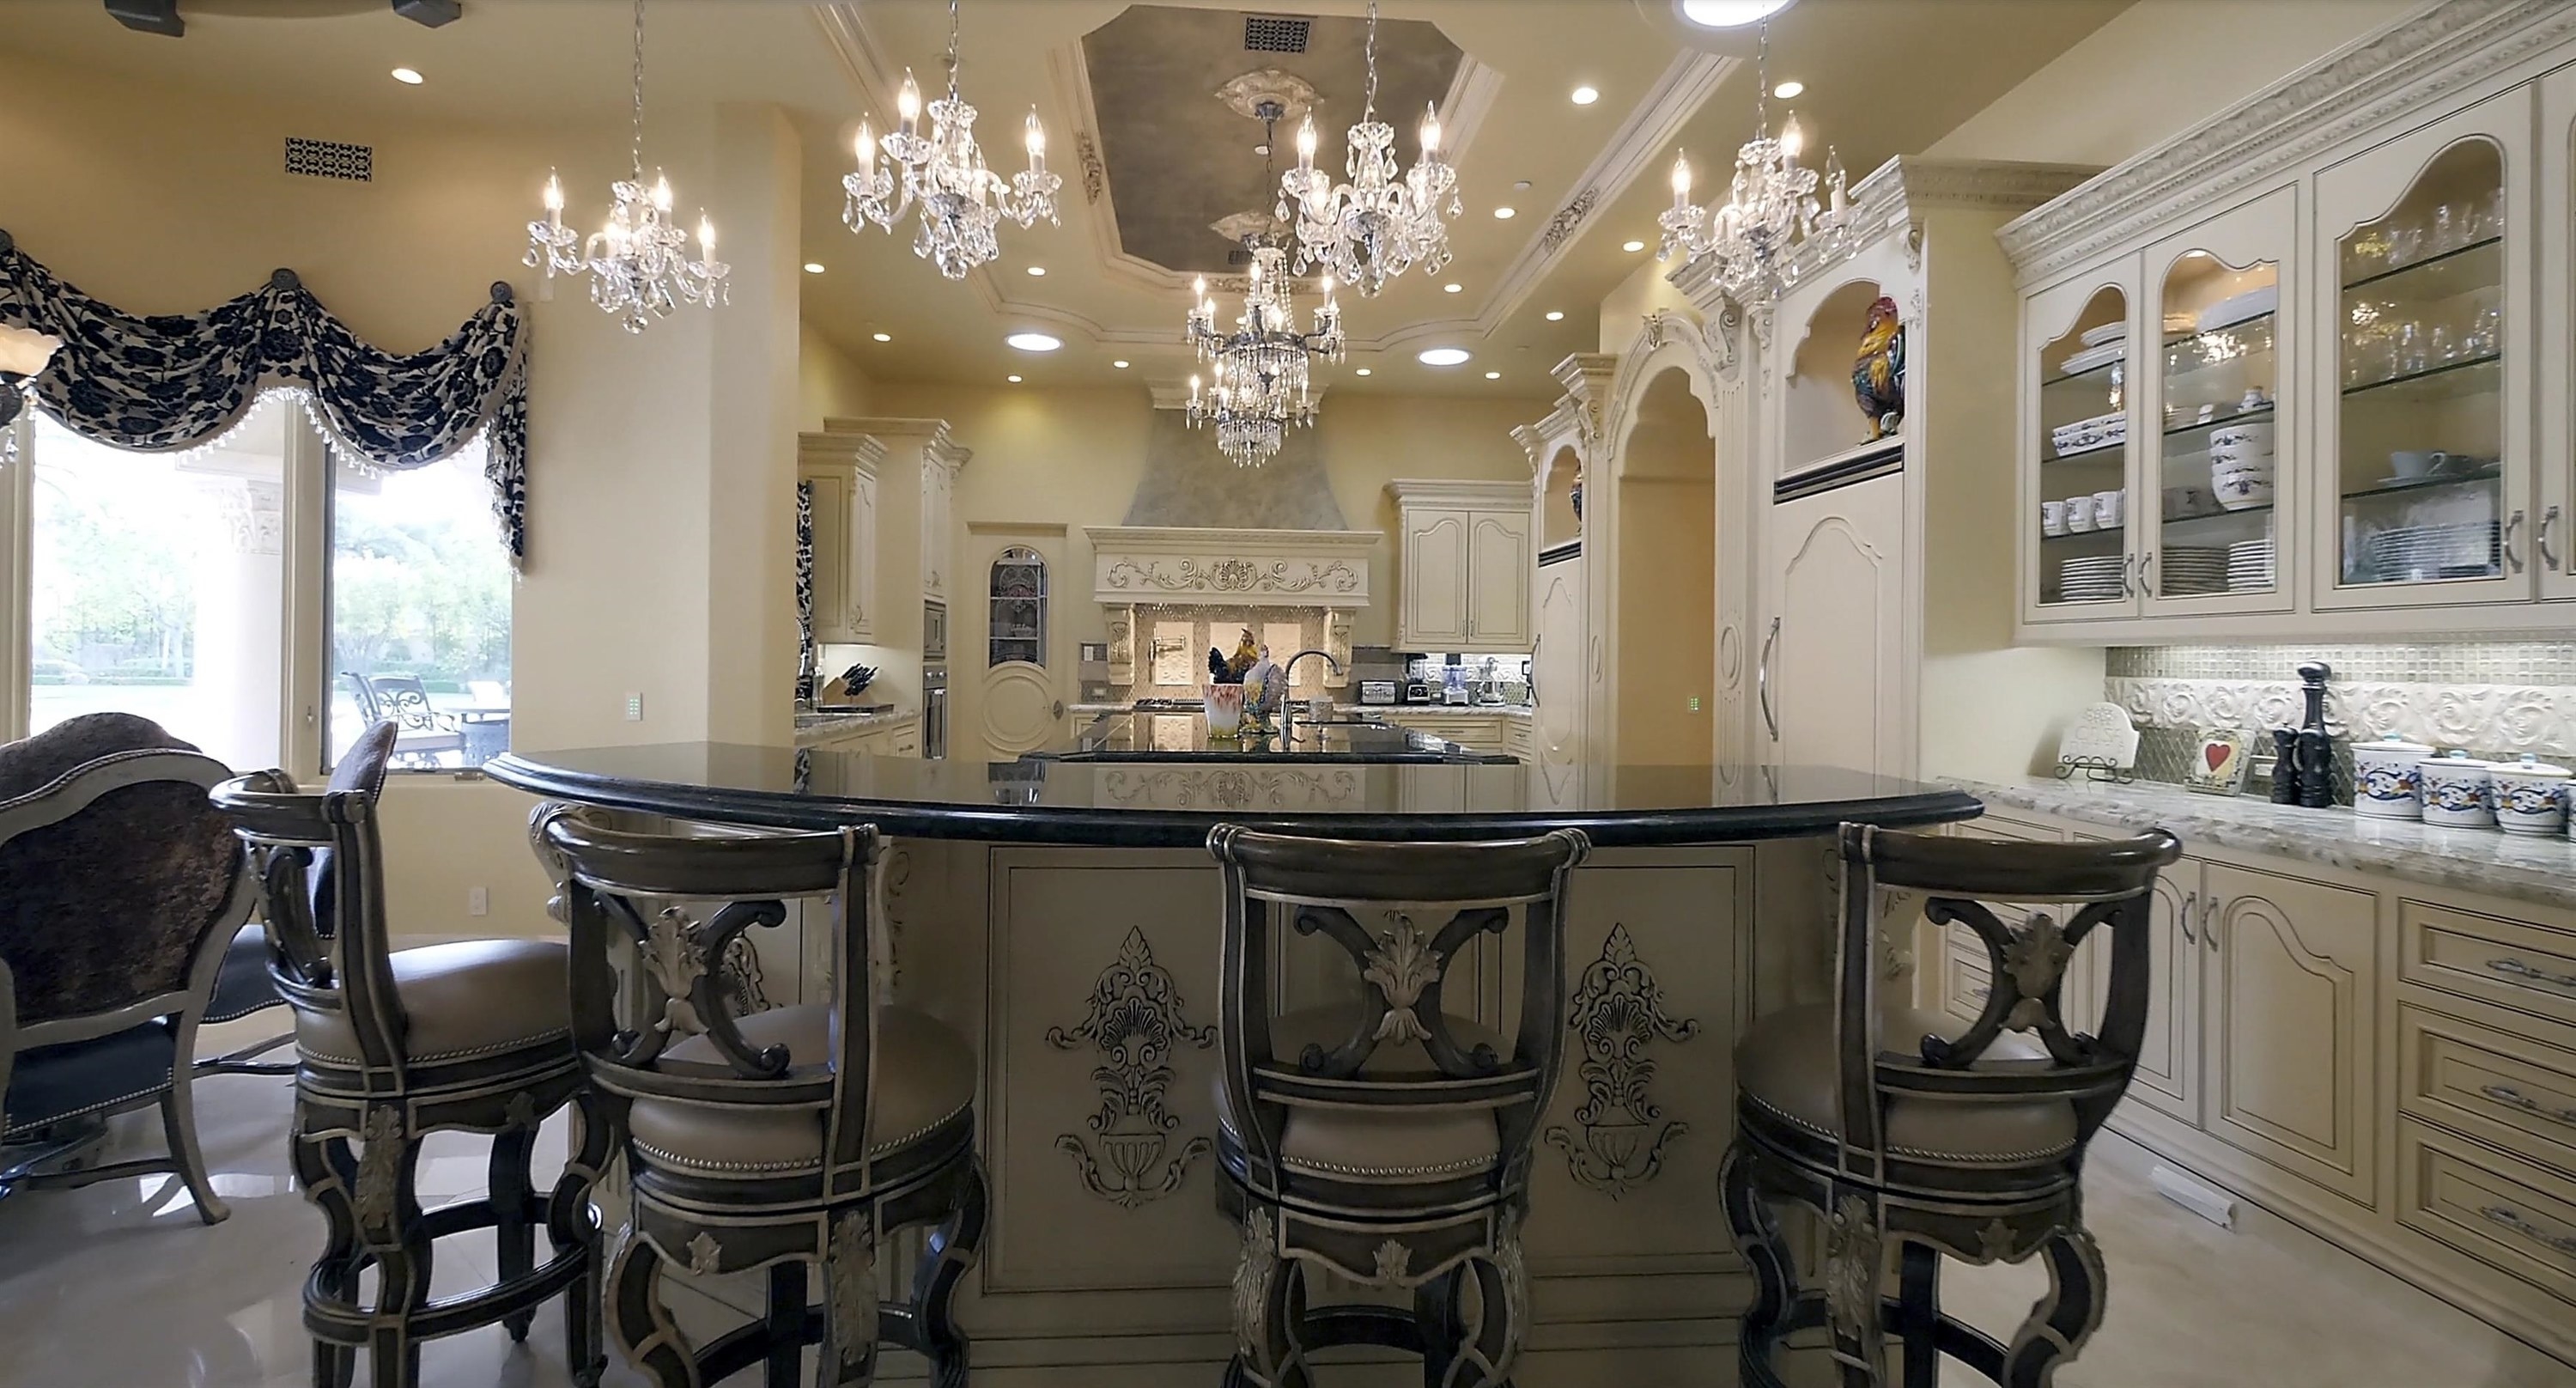 A different angle of the kitchen shows seven more chandeliers, multiple of which are hanging over the kitchen table